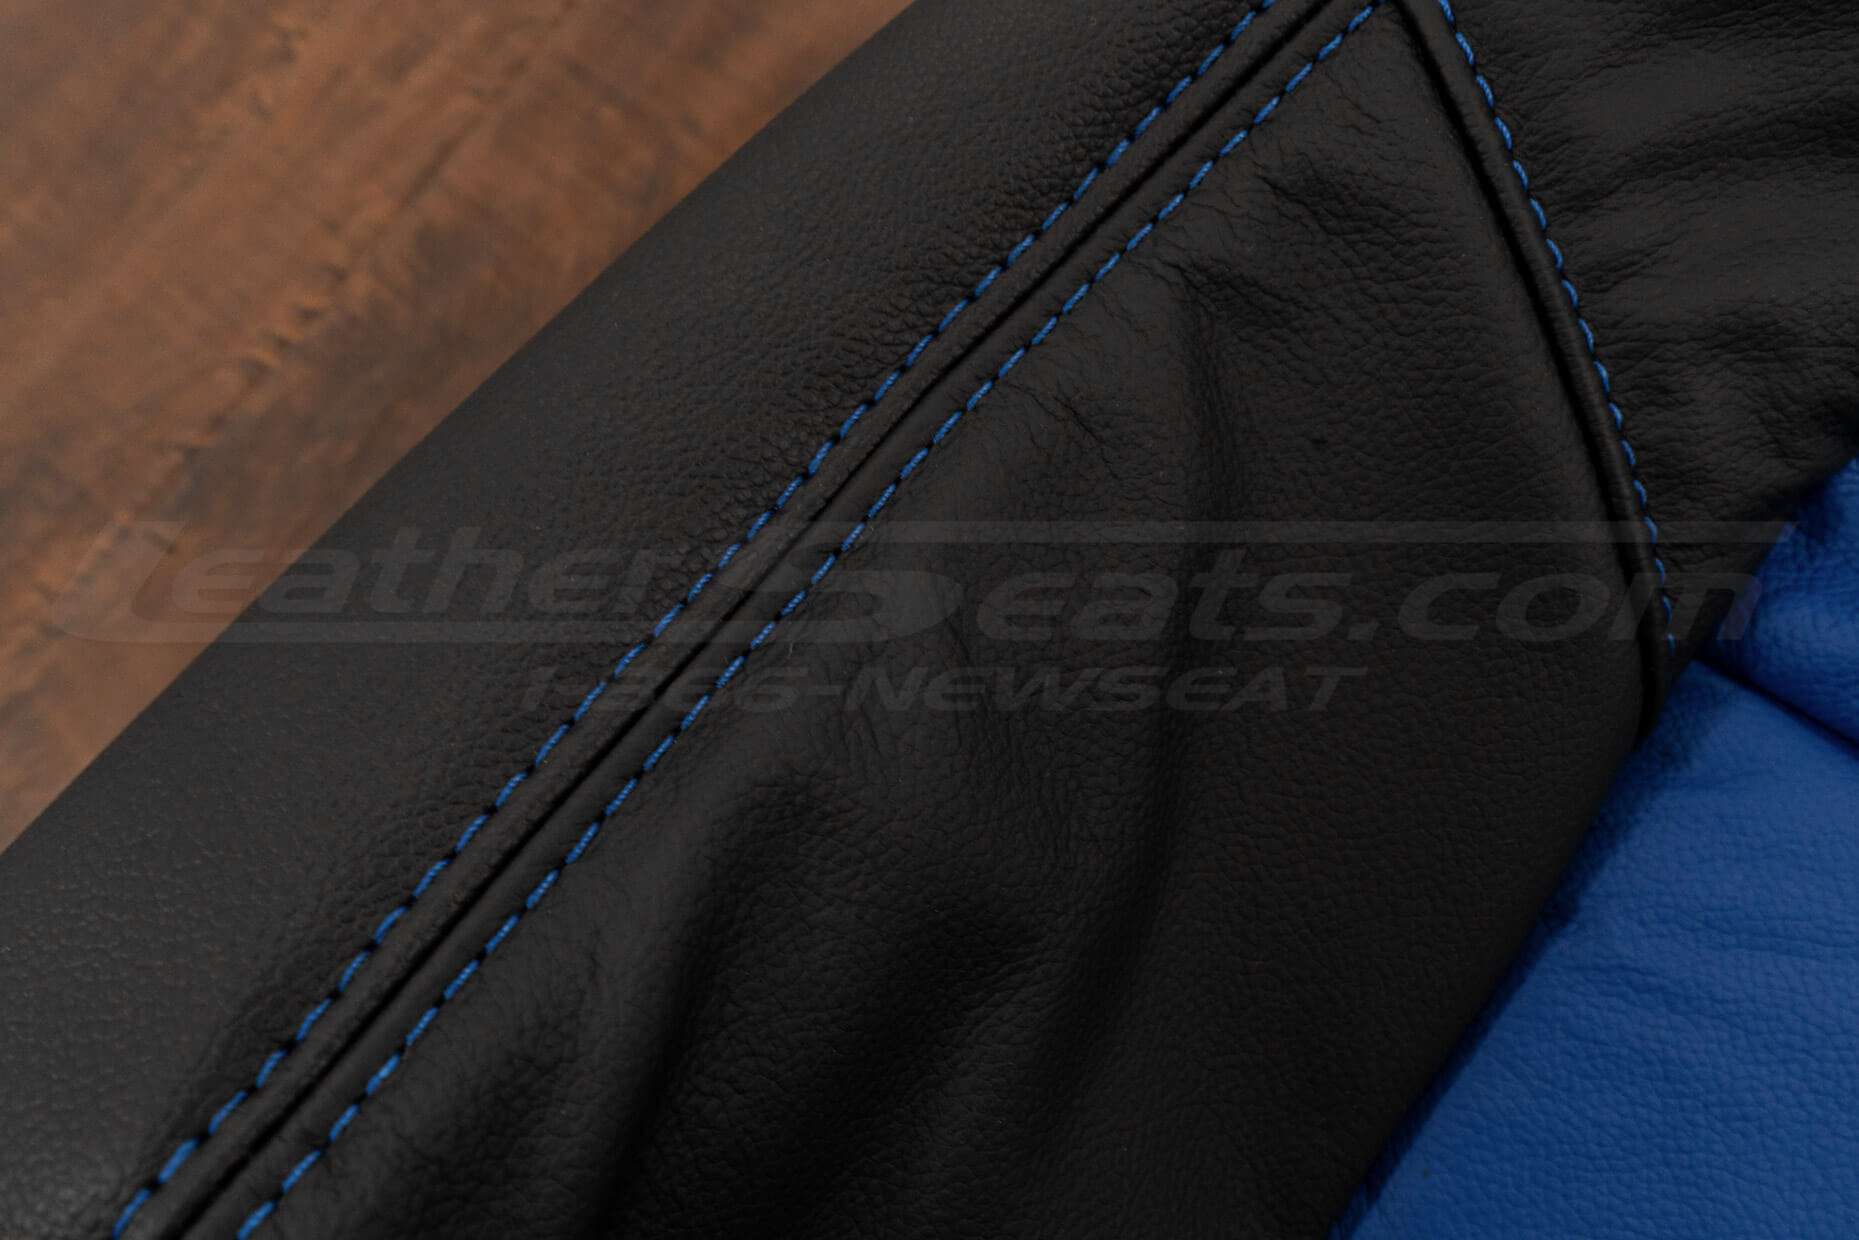 Contrasing double-stitching in Cobalt on Black leather